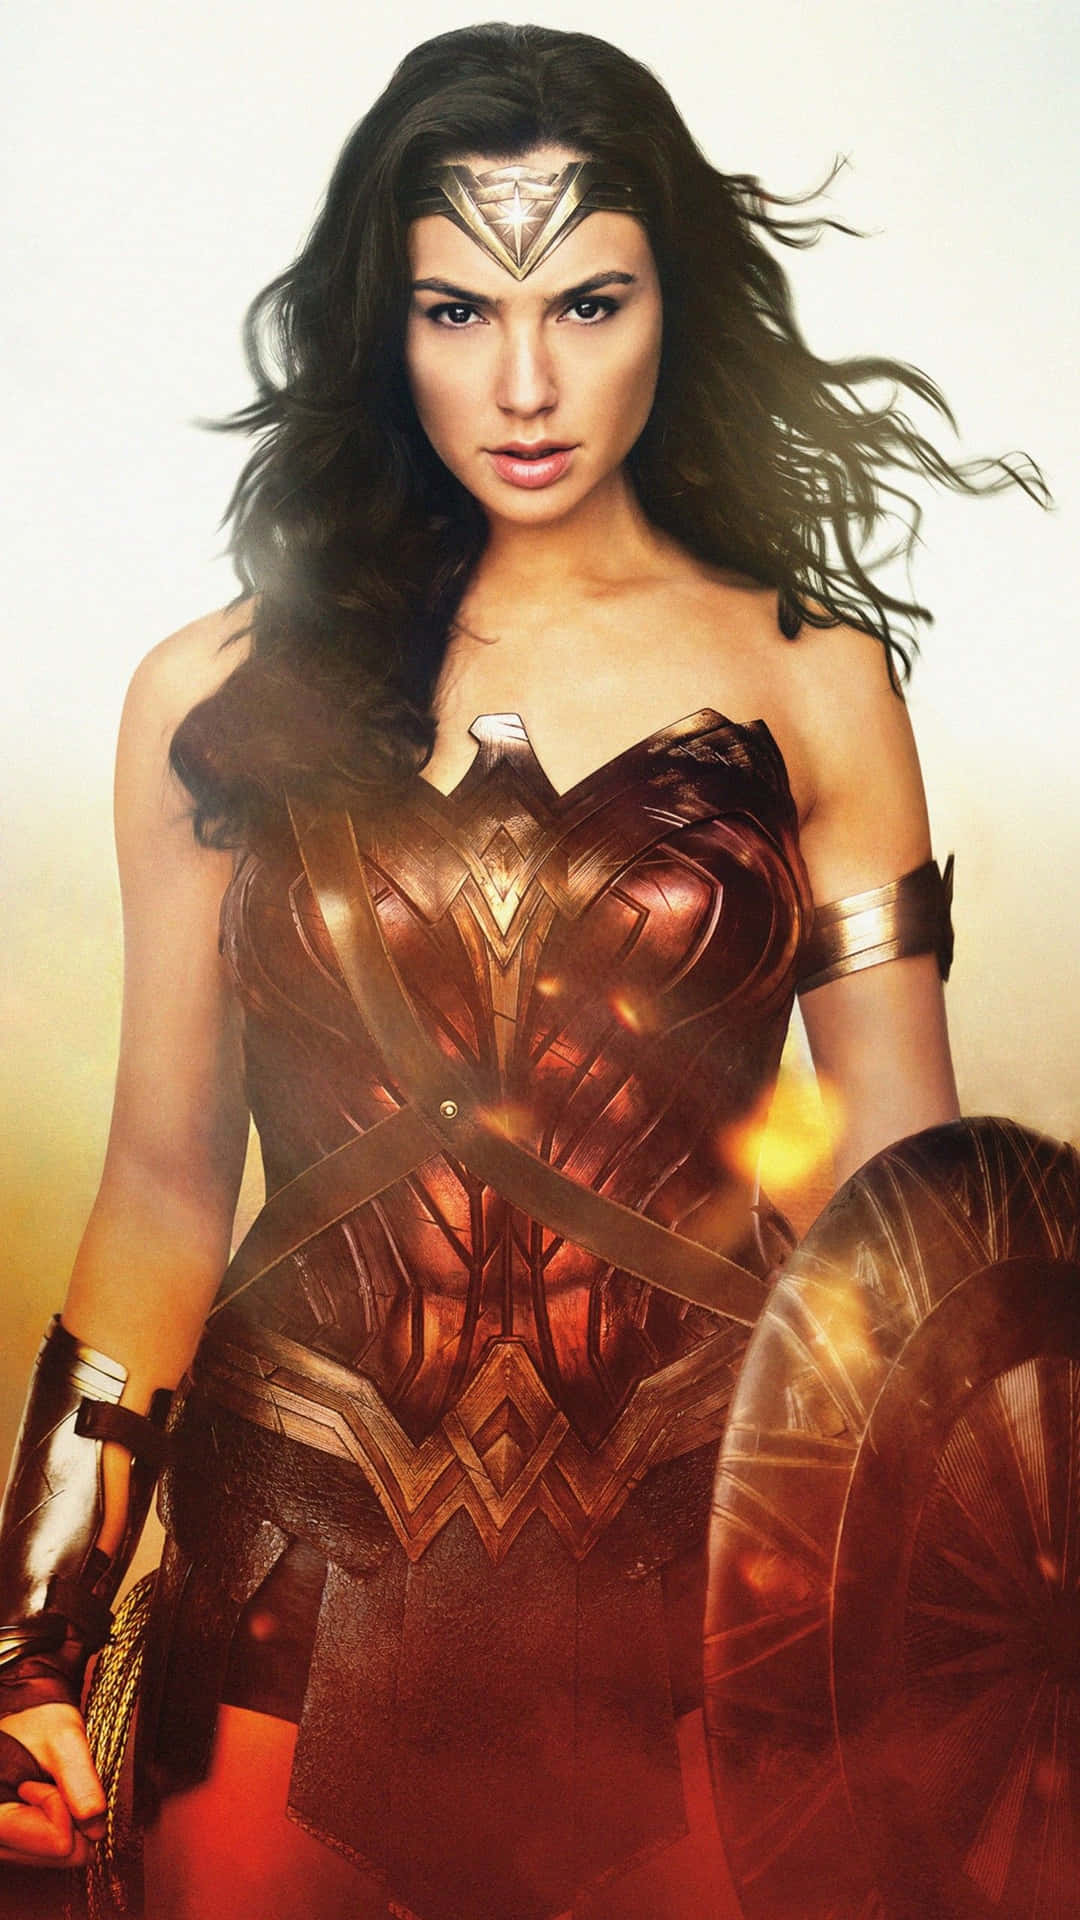 Caption: "the Spearhead Of Justice - Wonder Woman In Battle Armor."